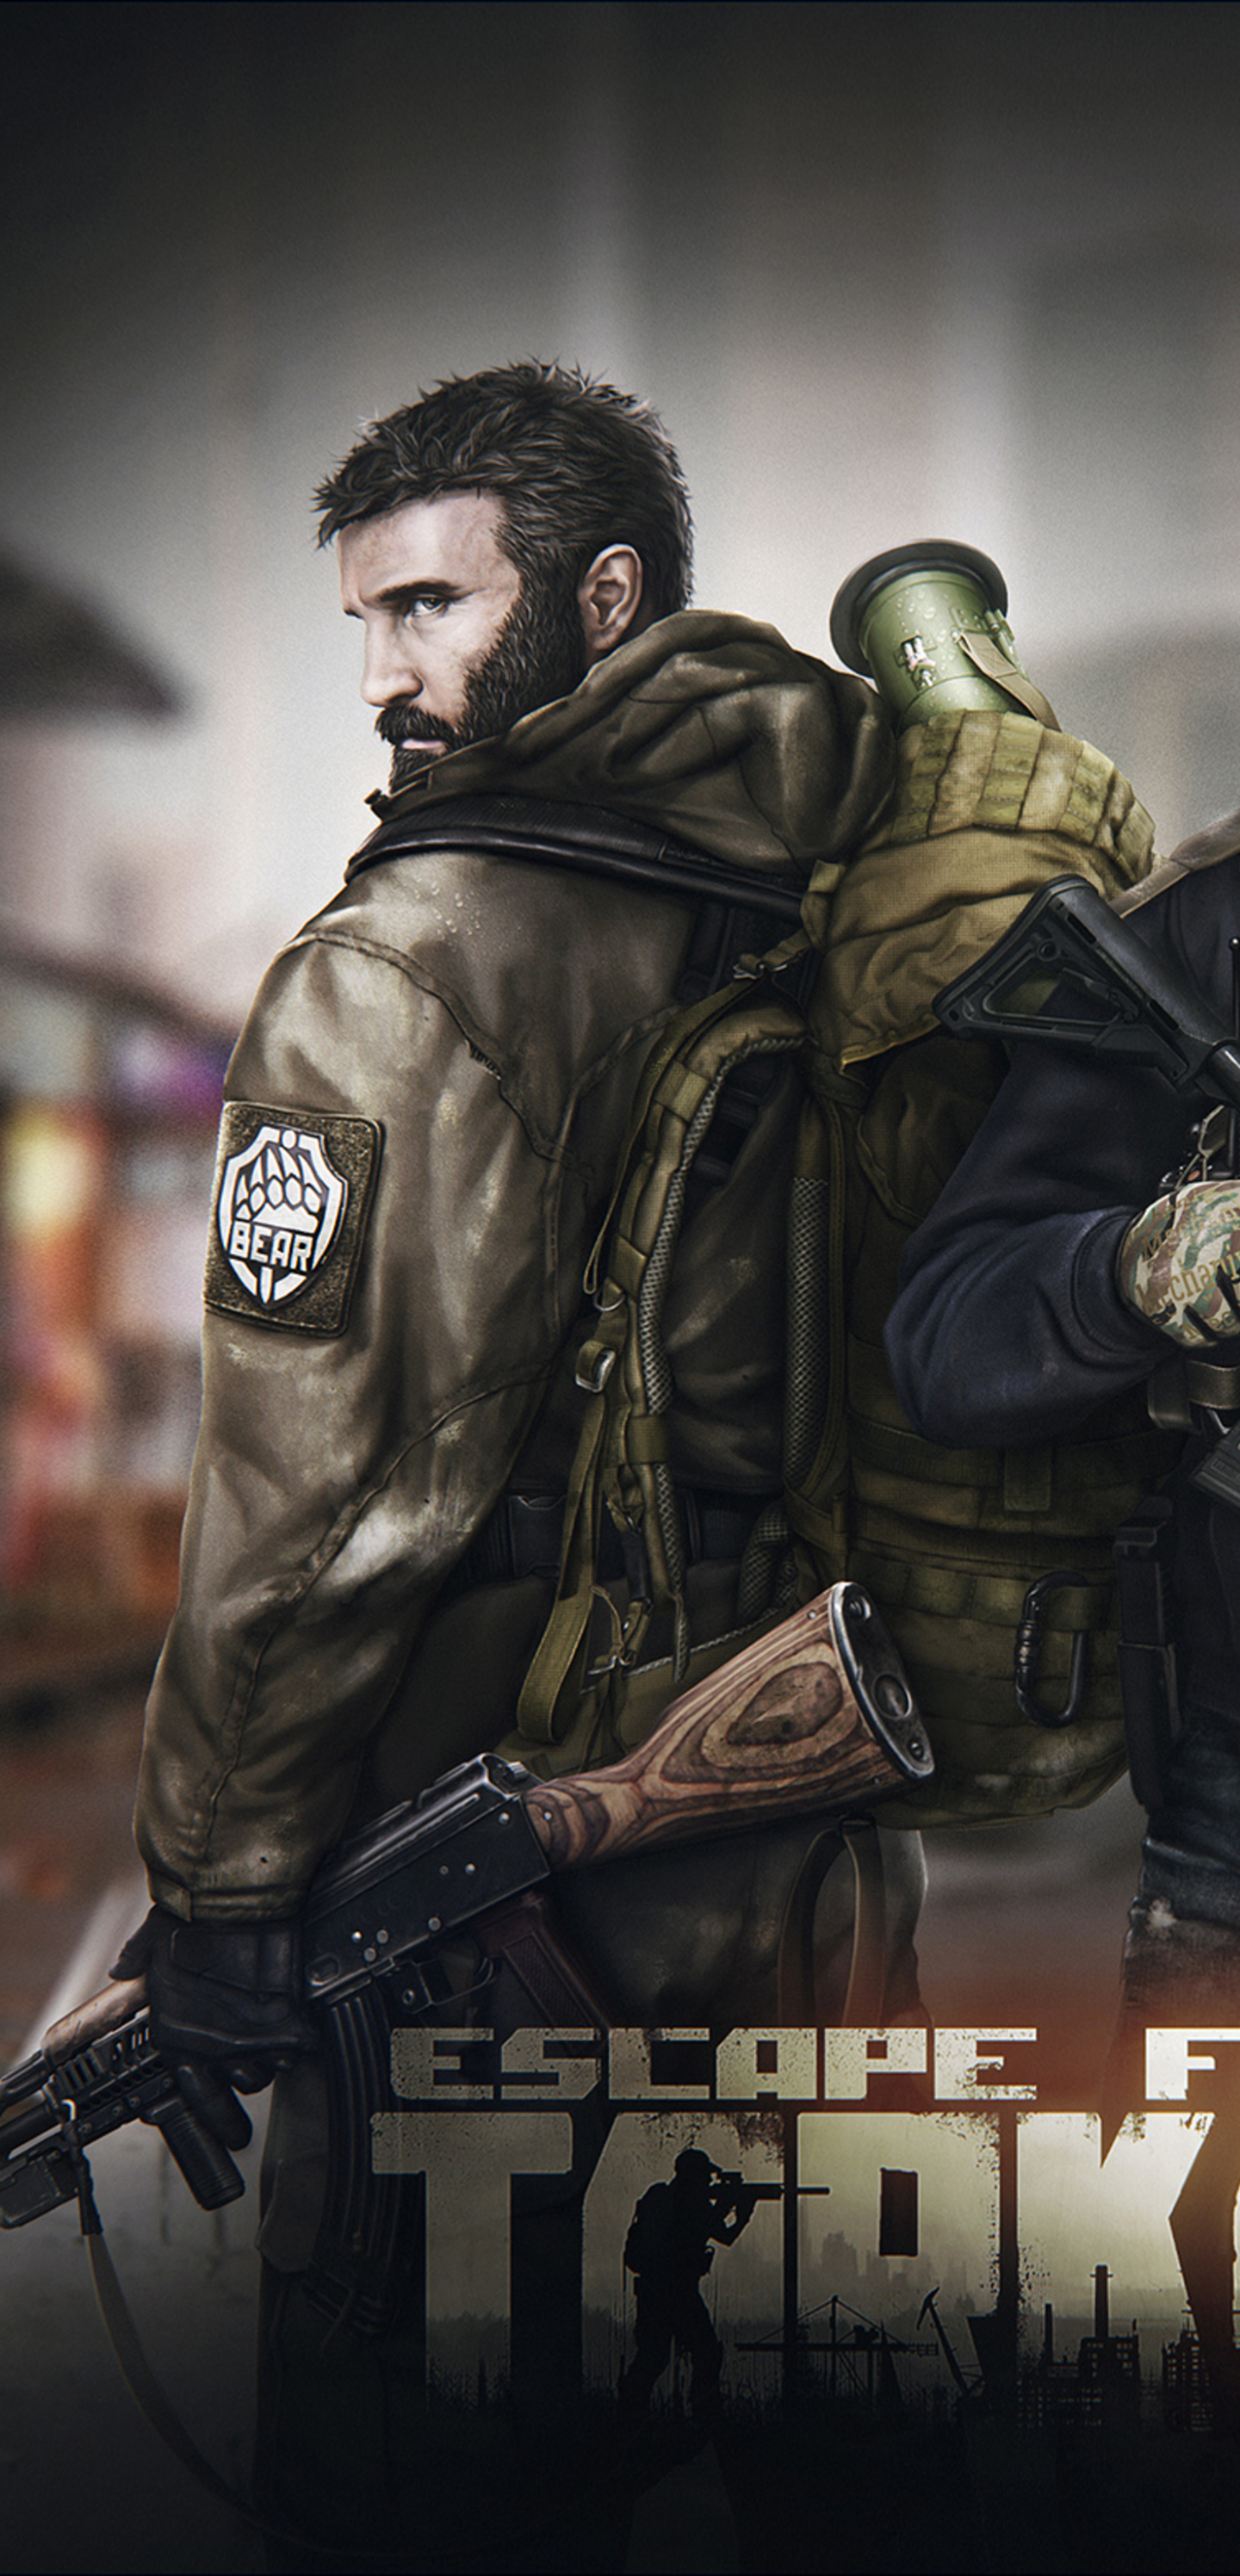 CaptainCarry  For all those Tarkov Lovers  UHD Desktop Wallpaper 3840  X 2160p Just cant get enough of it  httpswwwd3hellcomescapefromtarkovboostingleveling  EscapeFromTarkov EFT wallpapers gaming gamingislife war  Facebook